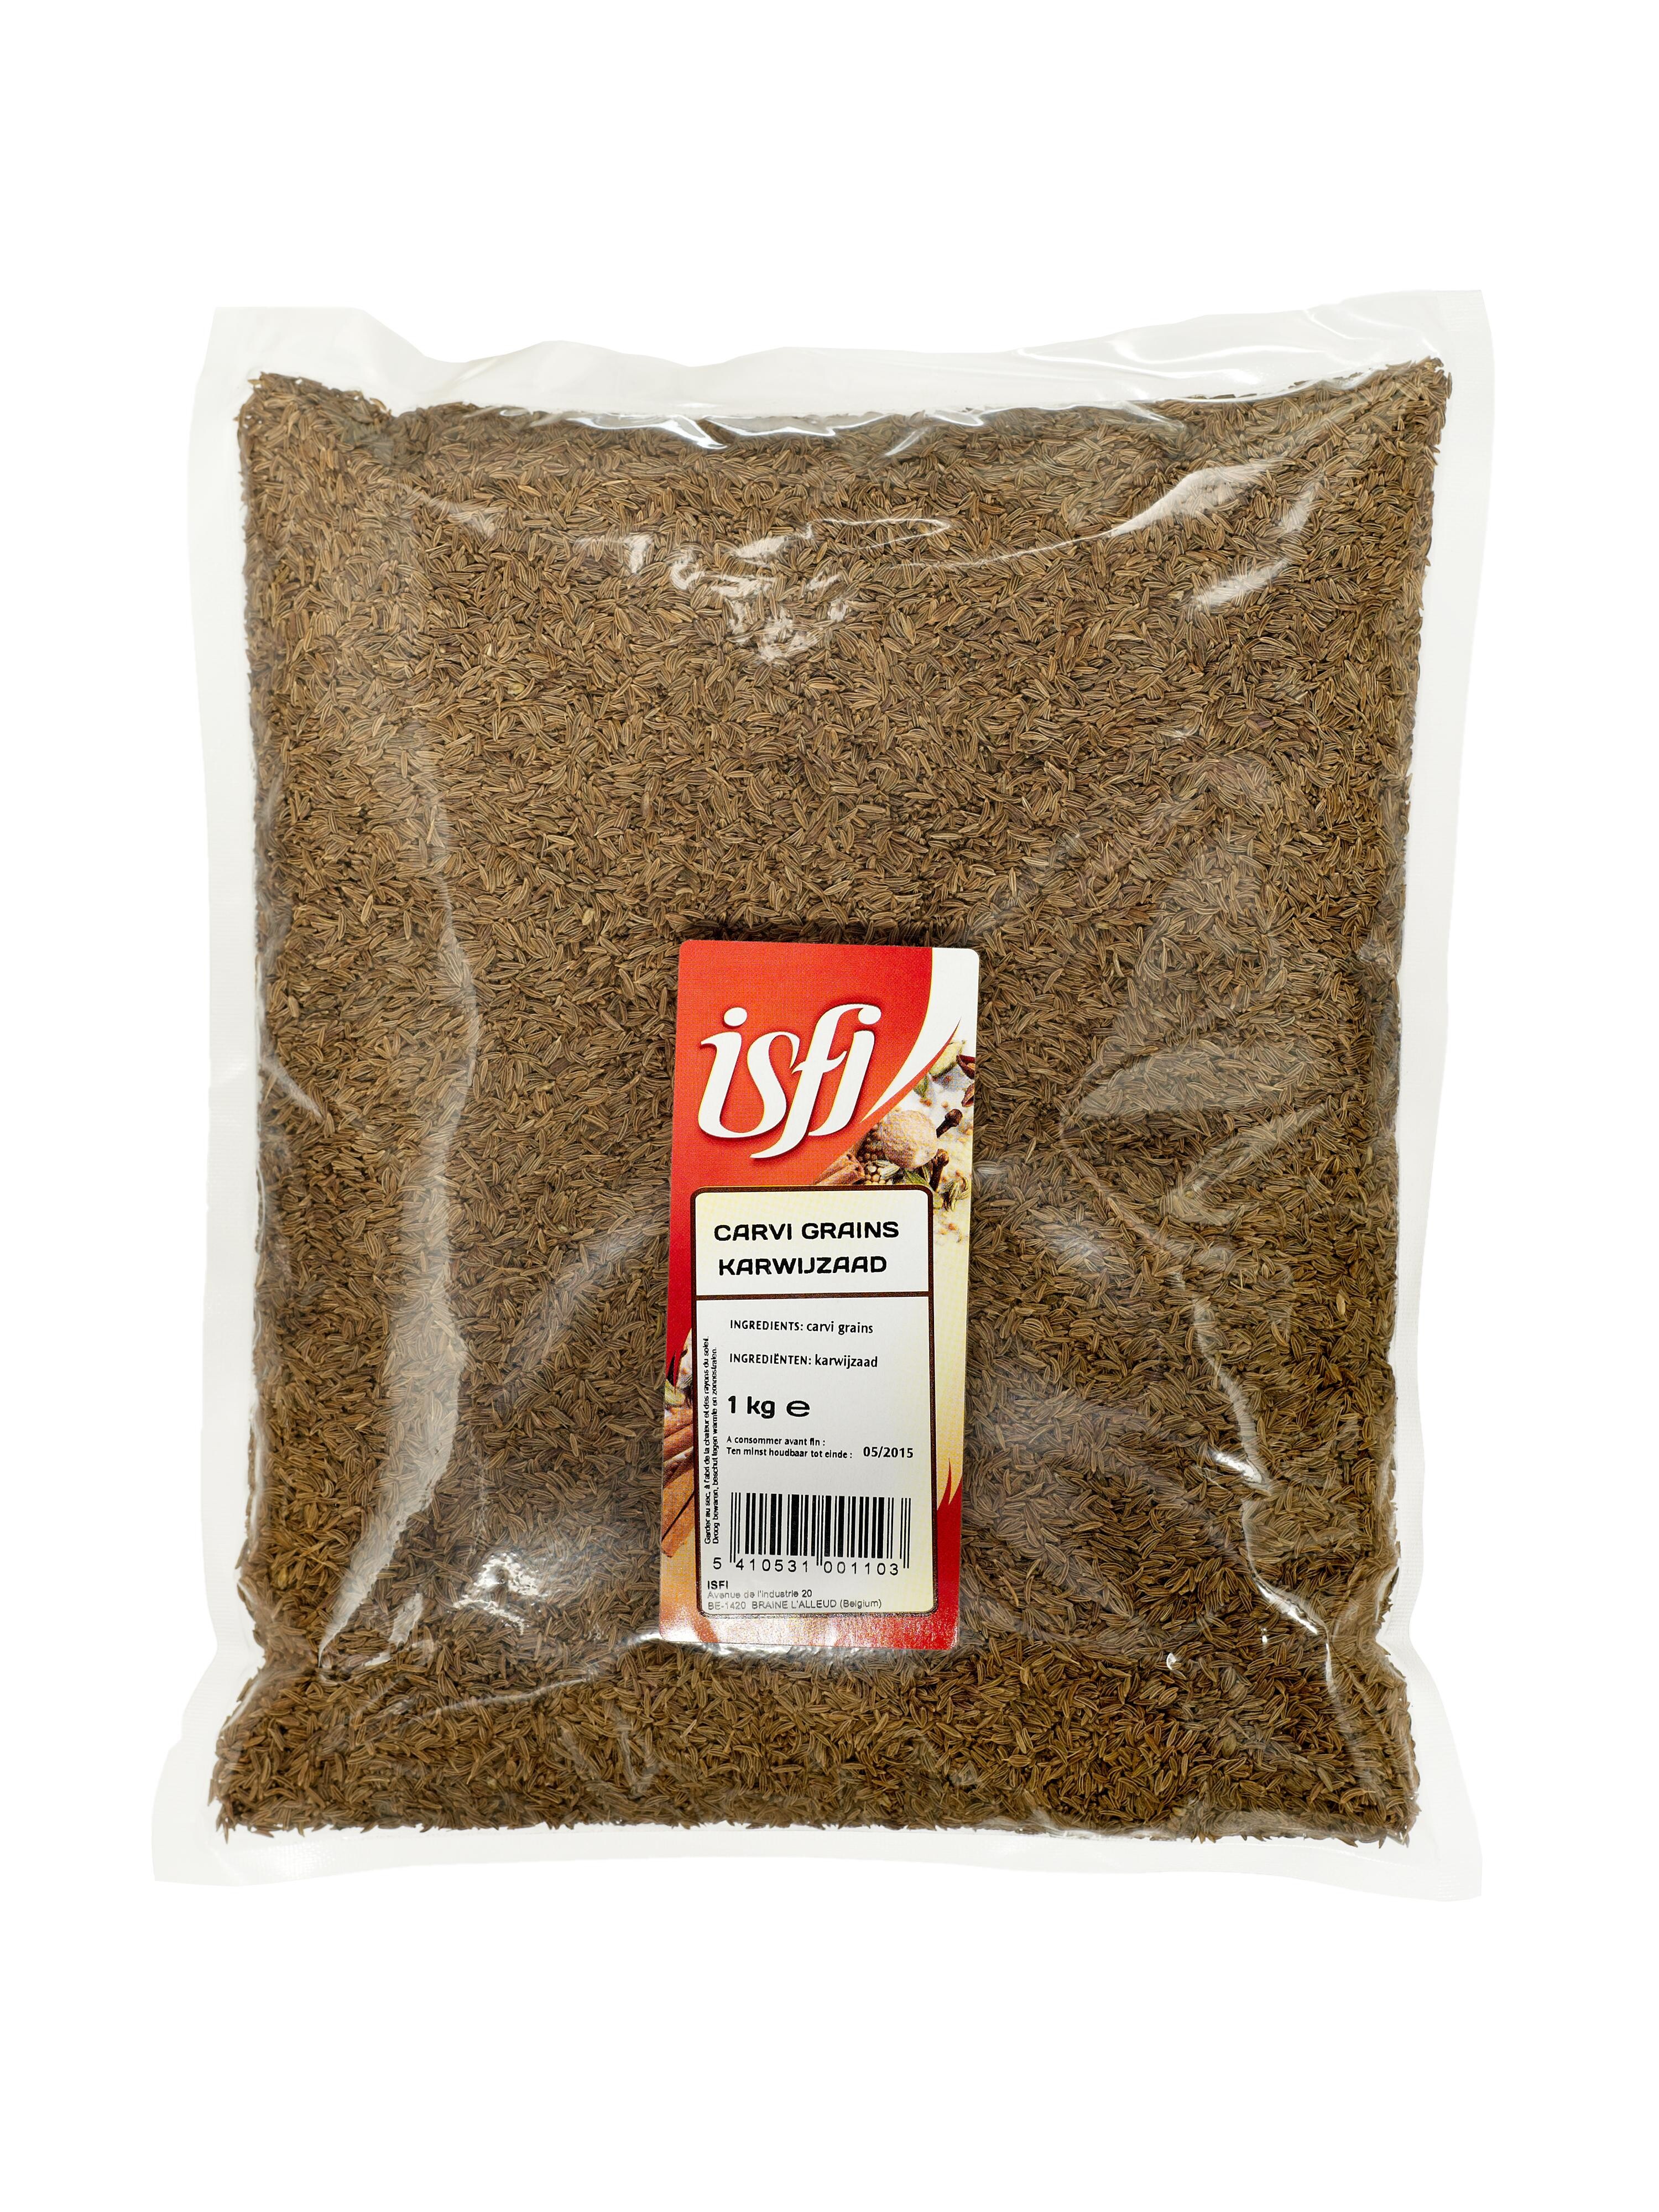 Caraway seeds 500gr Cello Bag Isfi Spices